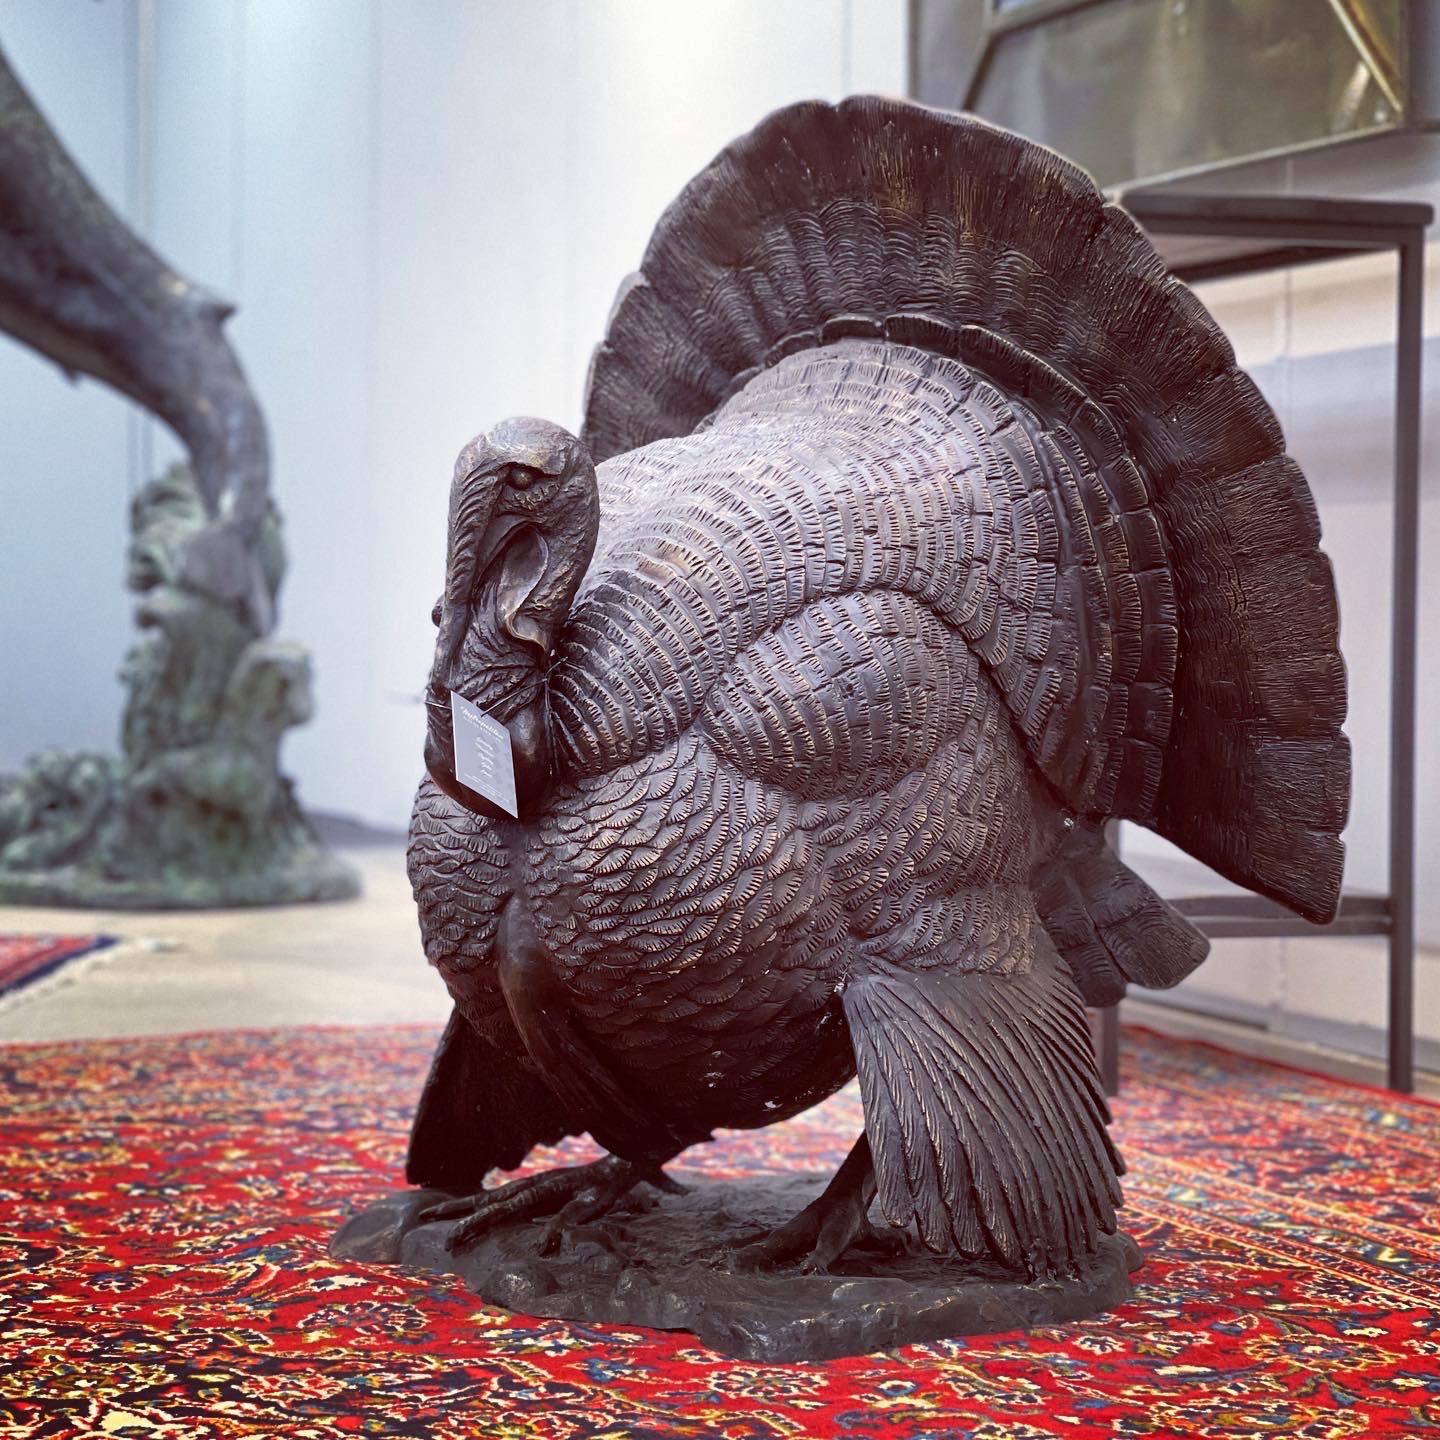 SRB10123 Bronze Turkey Sculpture exclusively designed and produced by Metropolitan Galleries Inc